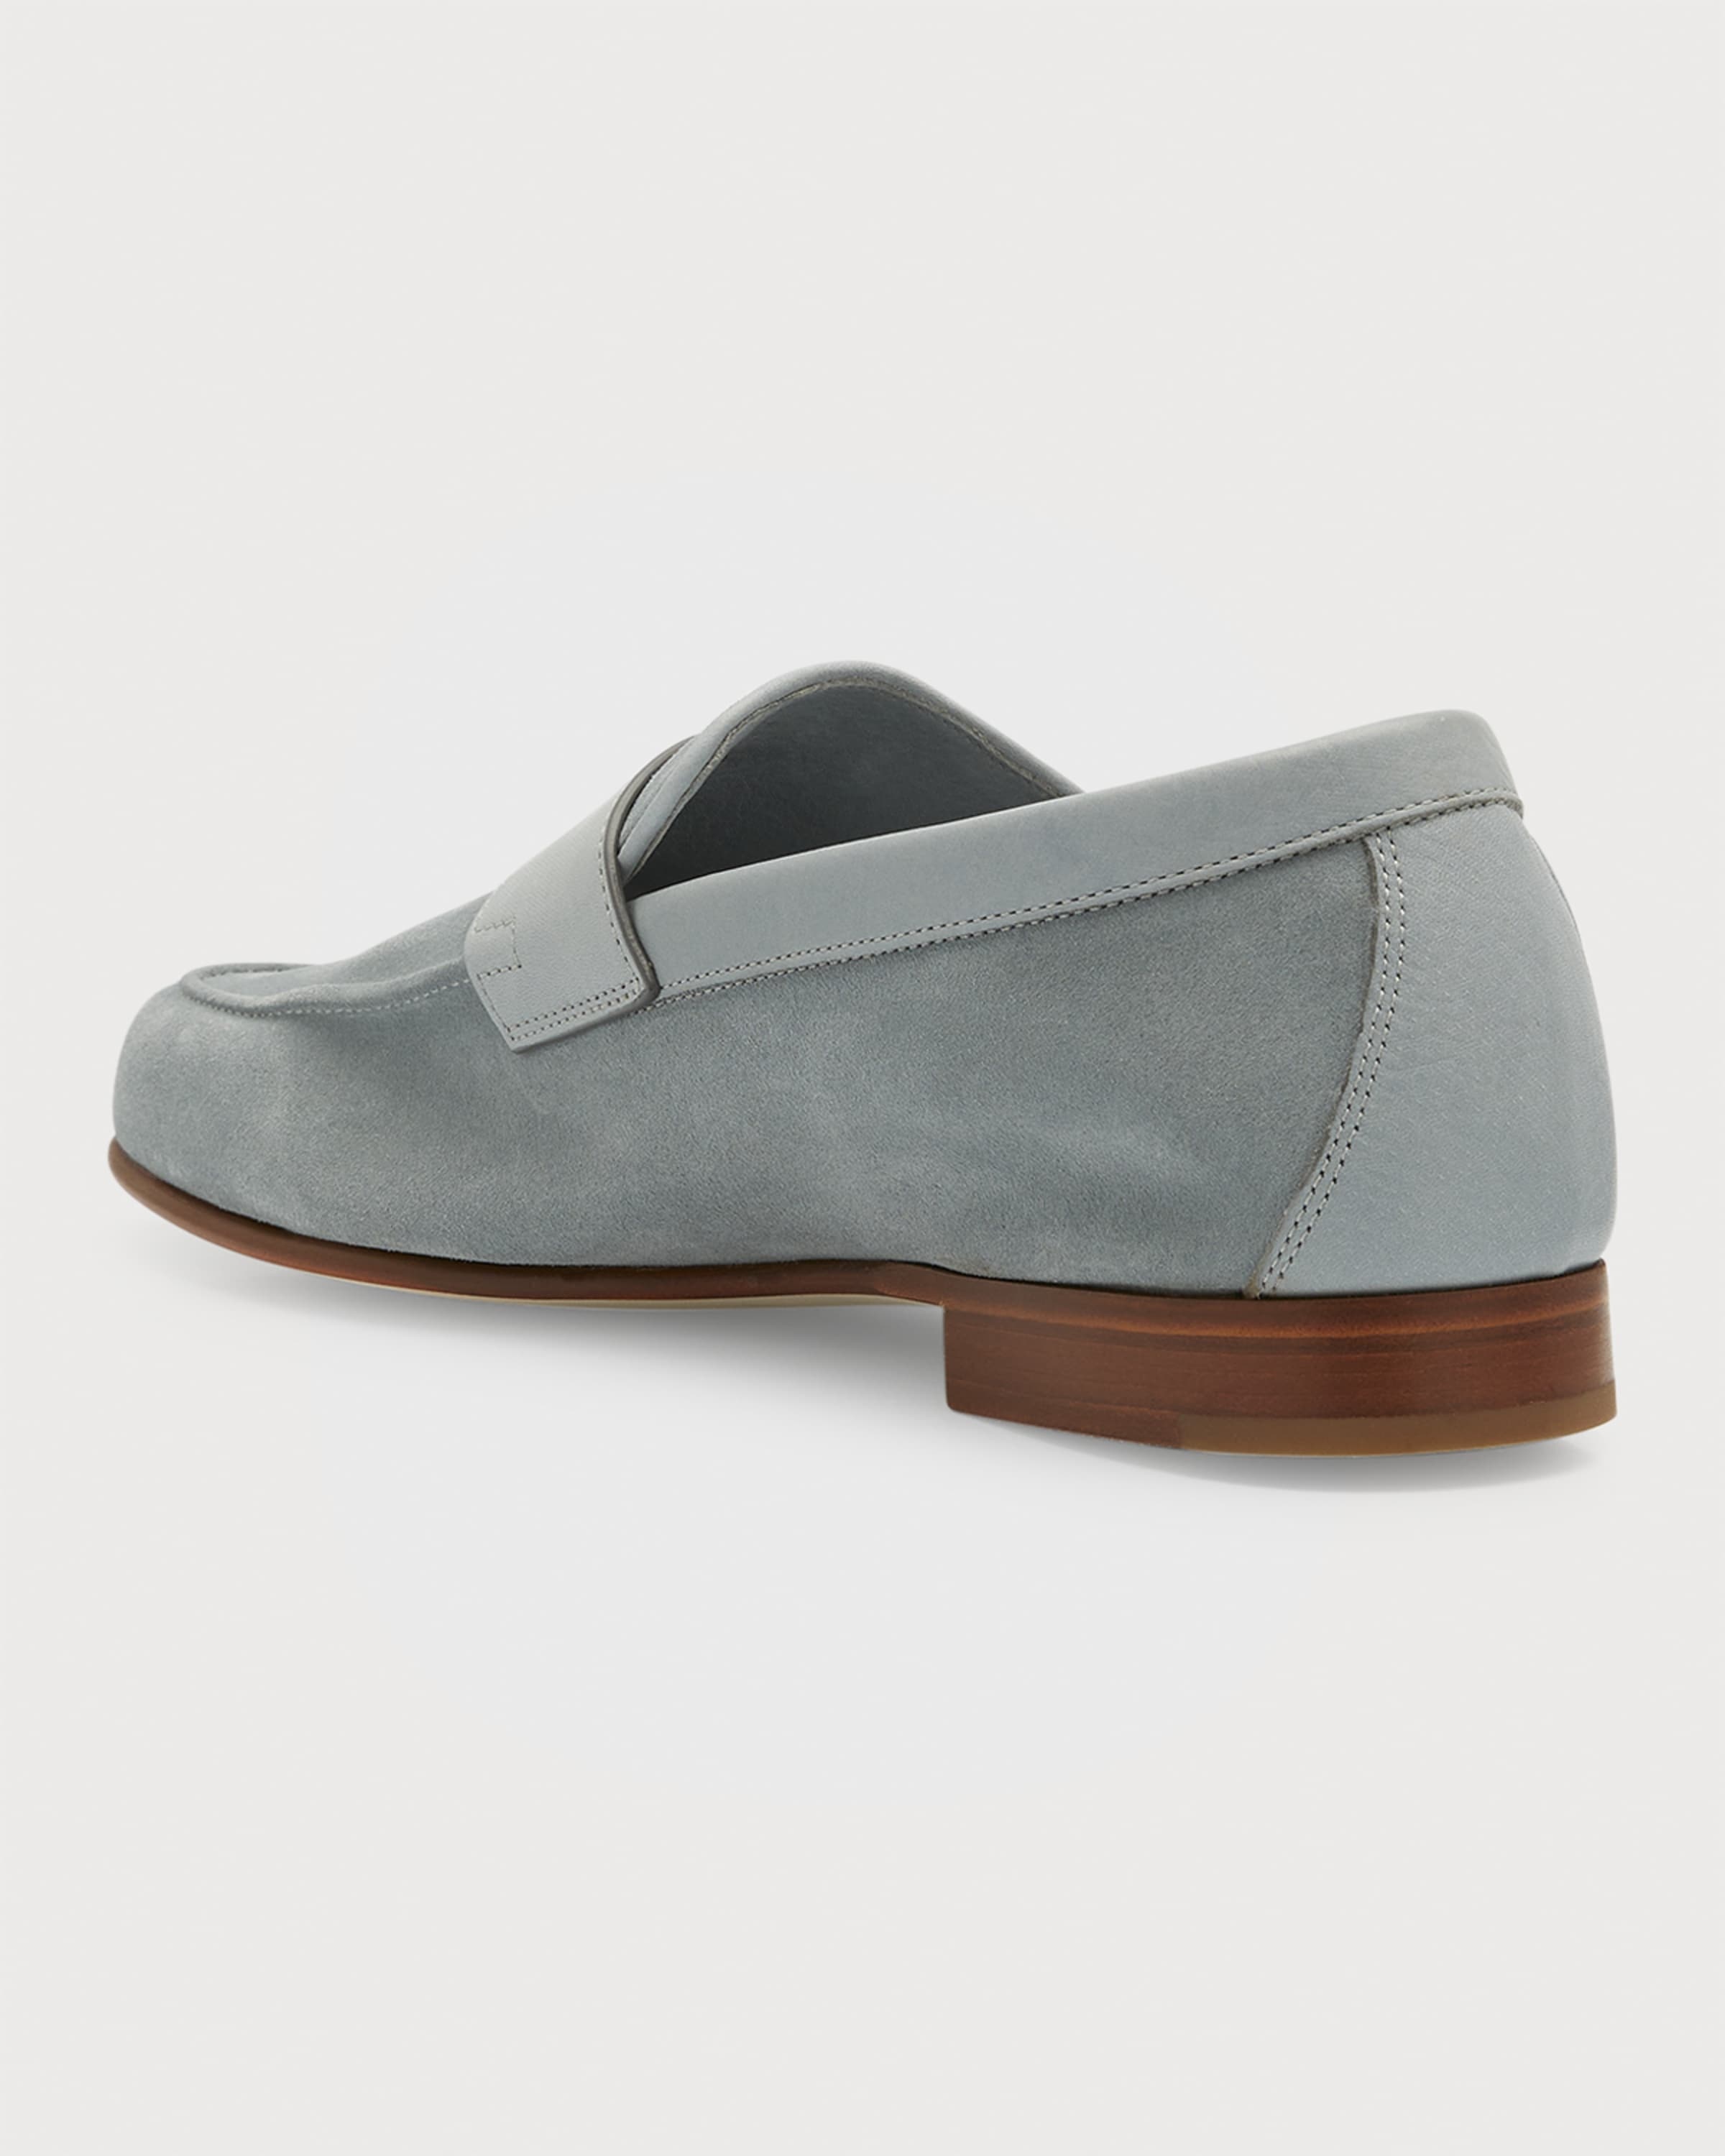 Men's Hendra Suede Penny Loafers - 4